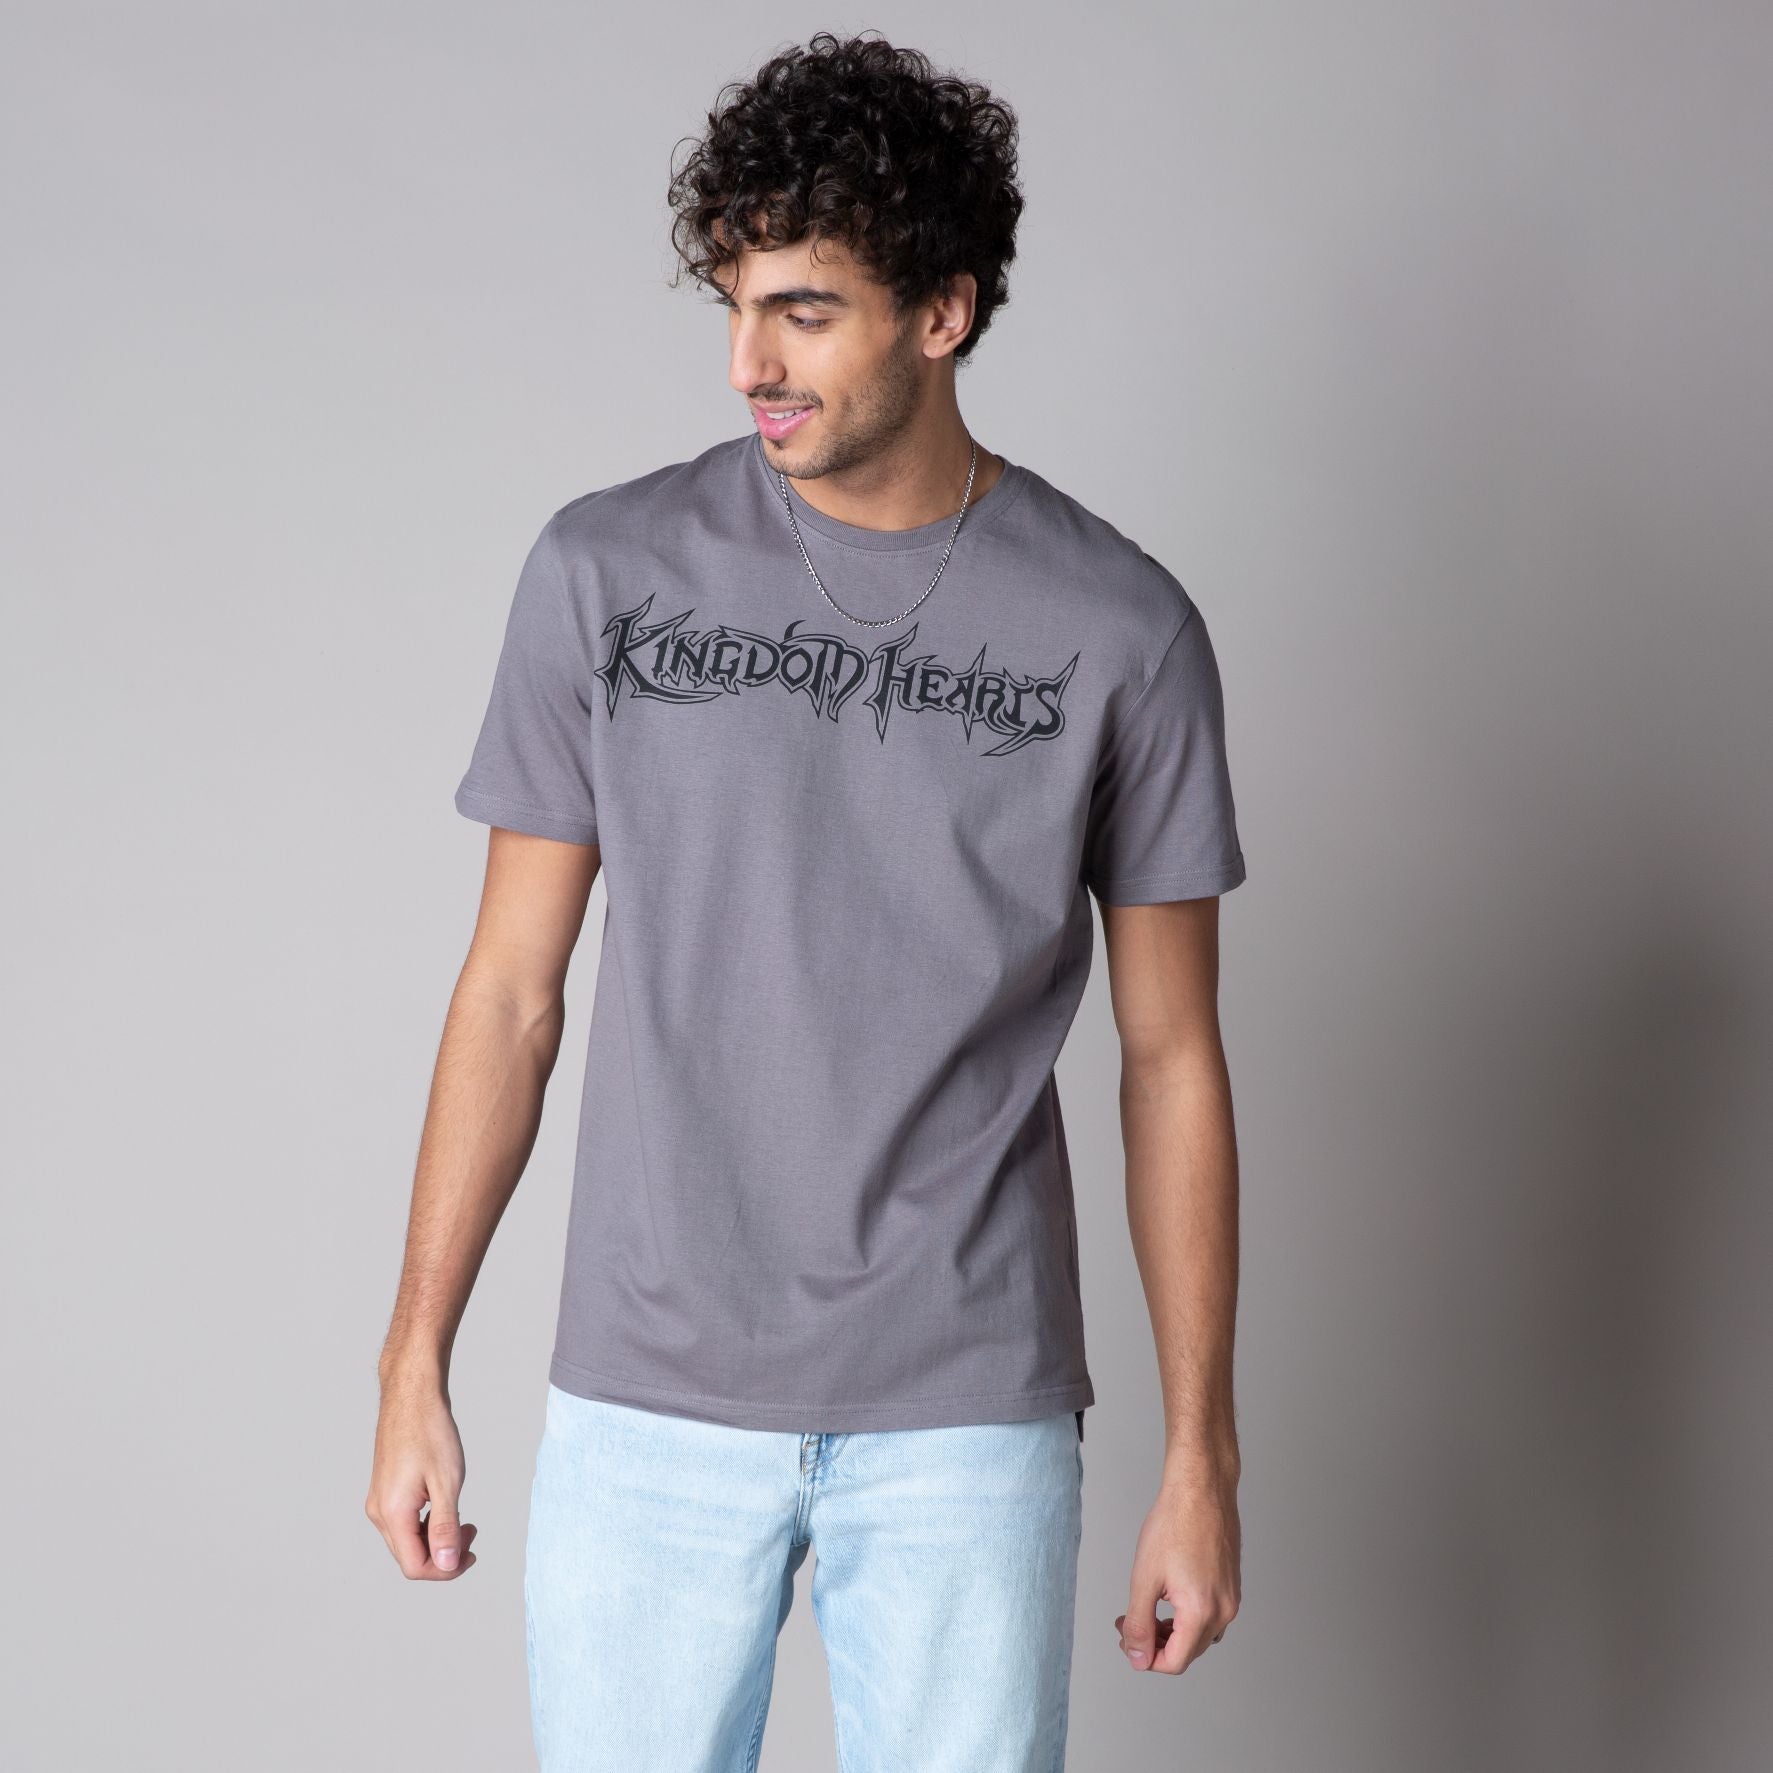 Kingdom of Heart Men's Relaxed Fit T-Shirt